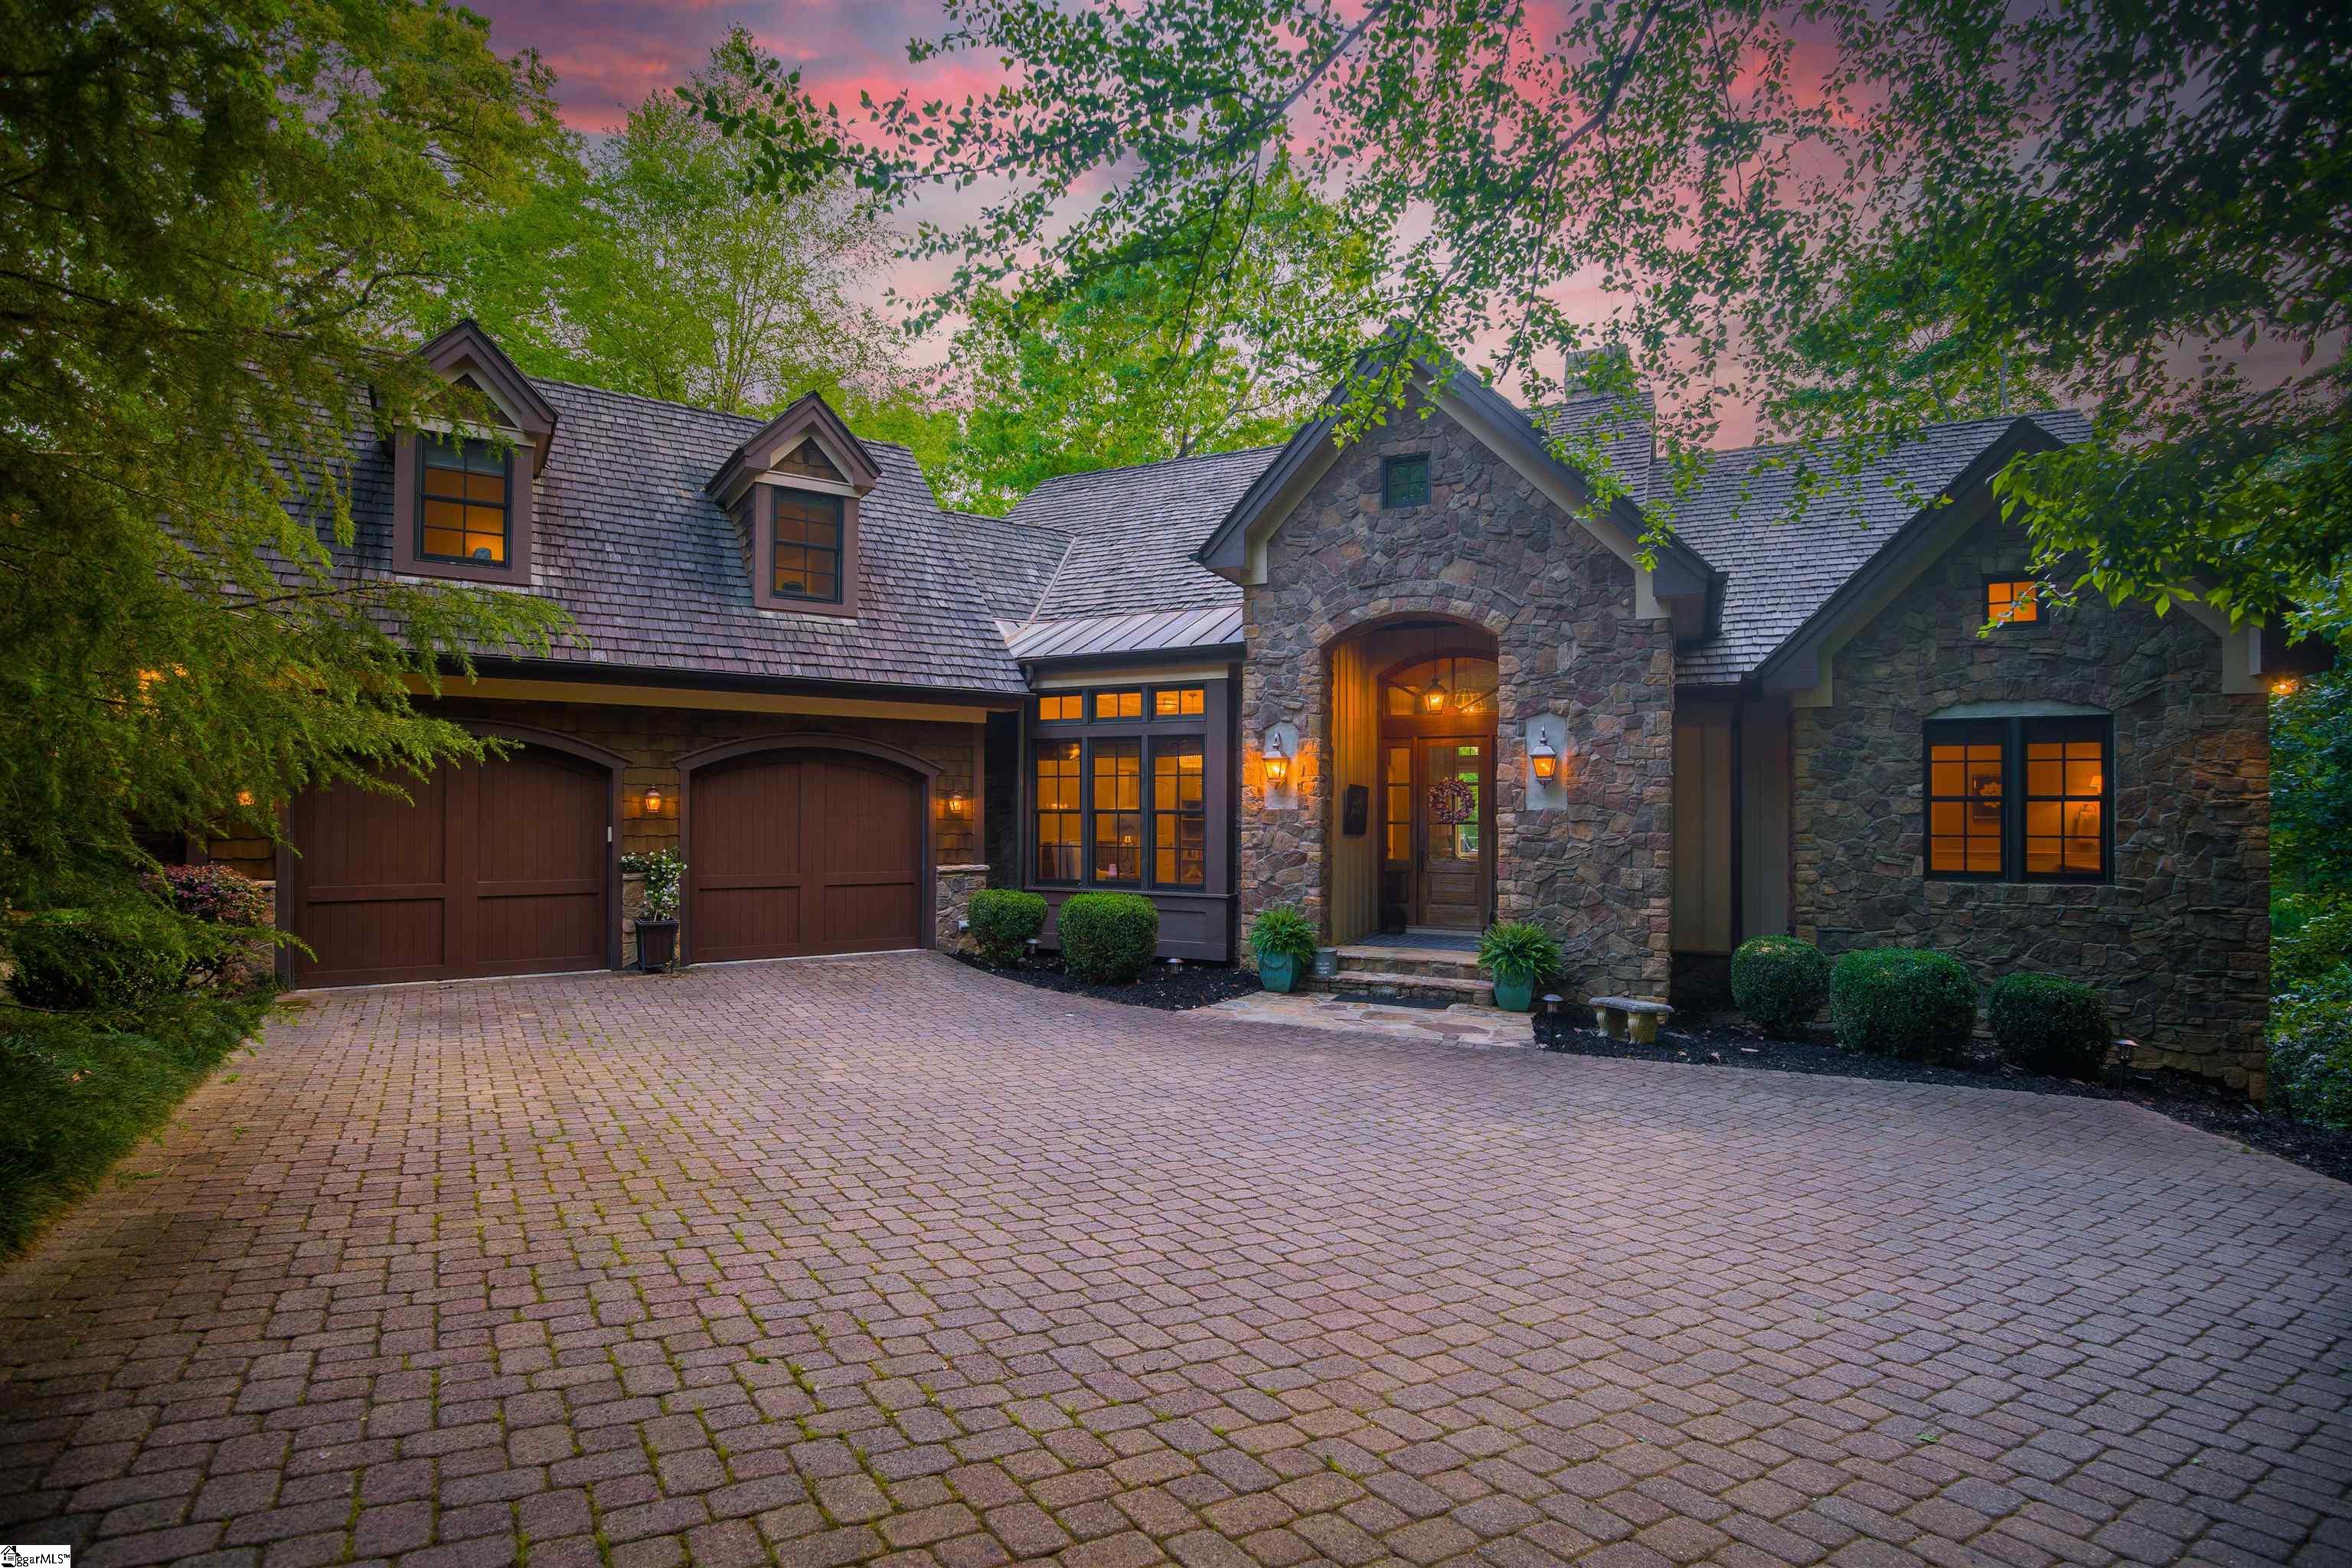 Casually Elegant. Originally constructed as a "modern day cottage" model home for esteemed Allora builders in 2007. 108 White Magnolia is dripping in custom, bespoke features from floor to ceiling! A few notable features that are immediately apparent upon arrival, is the beautiful stone exterior, copper accents, copper gutters and cedar shake roof.   Home is situated nicely on almost an acre (0.9 acre), allowing for privacy, a nice backyard (hard to find in the mountains!) and direct access to nature trails. Once inside, a large great room awaits with soaring coffered ceilings, a stacked stone fireplace and a wall of windows overlooking the natural mountainscape to the rear. Hickory floors run the throughout the main level. A beautiful kitchen and dining room overlook the living room. Kitchen offers high end commercial appliances, a breakfast bar, and island with vegetable sink. The adjacent screened porch has a very cozy treehouse vibe and is a popular hangout spot. If dining al fresco is more your speed, a large back deck can easily accommodate. Back inside on the main level you’ll find a gracious study (or formal dining) just off the foyer with built ins, coffered ceiling and an adjacent full bath and bar. The master suite is a dream… offering a luxurious bath with jacuzzi tub, dual vanities and tile shower. Also offers direct access to the back deck.   Find your way down to the terrace level to find a lower den that is ready to host your next movie night, with projector and movie screen. Two guest bedrooms with en suite baths can be found on either side of the lower den. A back terrace offers a wonderful third outdoor living space.   A private suite can be found over the garage. Whether you need a game/craft room, man cave or private bedroom suite, that will truly fit the bill.   Do you enjoy natural amenities like hiking trails, rivers and lakes? Or perhaps manicured, man made amenities are more your speed? At 108 White Magnolia, you don’t have to choose. The property borders a 272 acre county park to the east with hiking and mountain biking trails, a fishing lake and a waterfall and streams. Within the Cliffs at Mountain Park, members are treated to world class amenities like a Gary Player Golf Course, Wellness Center, and the Cabin.. a fan favorite restaurant. Mountain Park is centrally located amongst the Mountain and Lake regions, offering members access to all 7 Cliffs Clubs. A Cliffs Membership is available for purchase with this property. Located 35 minutes to downtown Greenville, 45 minutes to Asheville, 10 Minutes to Traveler’s Rest and 5 minutes from neighboring Cliffs Valley. 3,469 Square Feet.